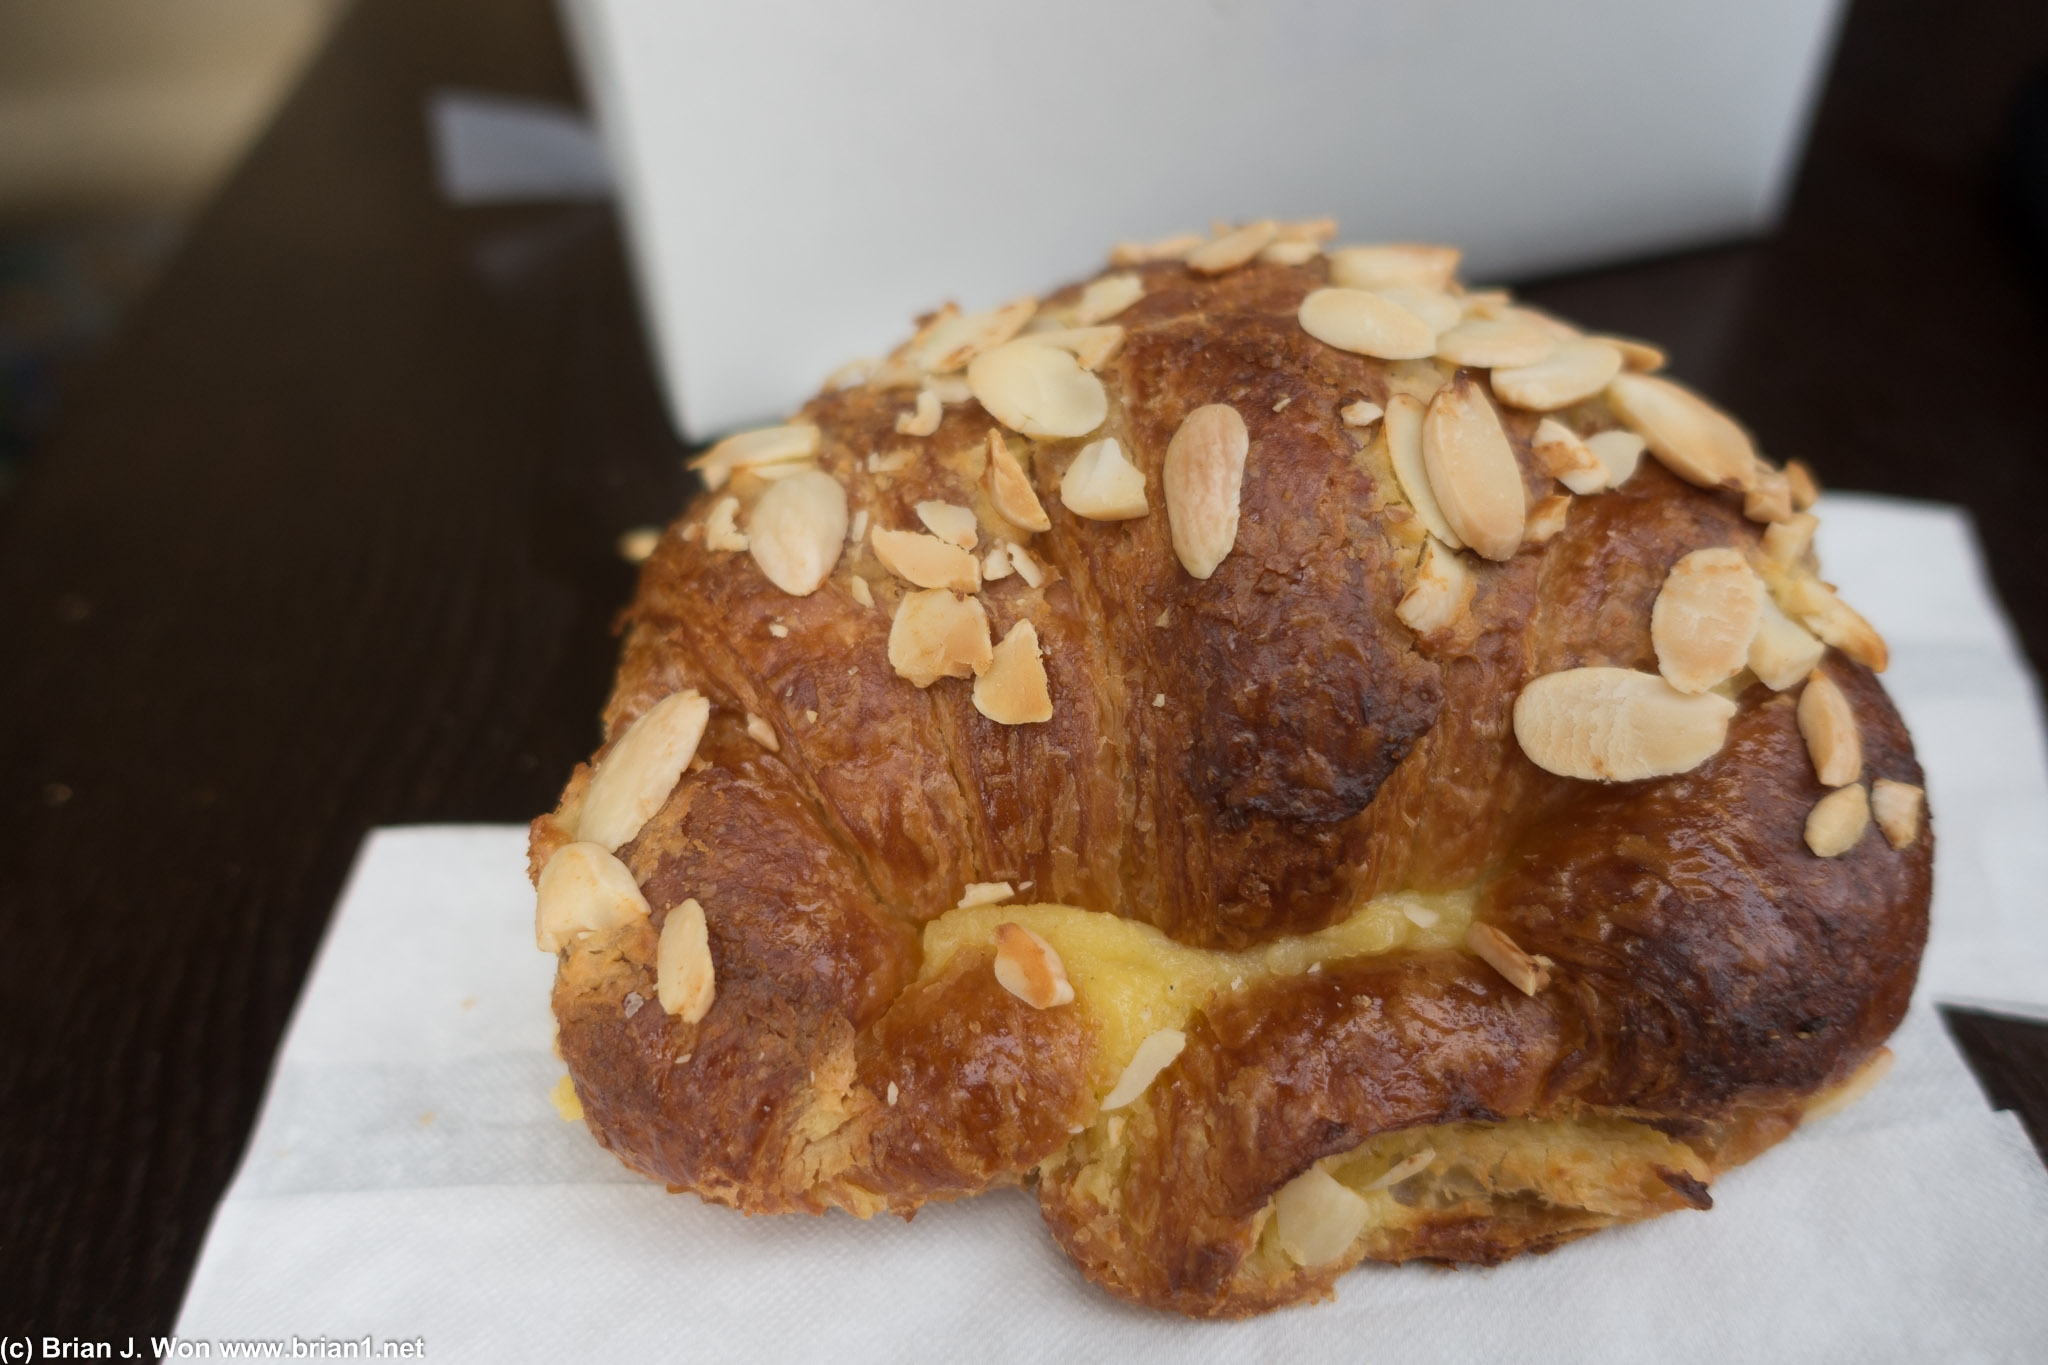 Almond croissant's almost paste is too creamy, and the croissant itself was too hard.